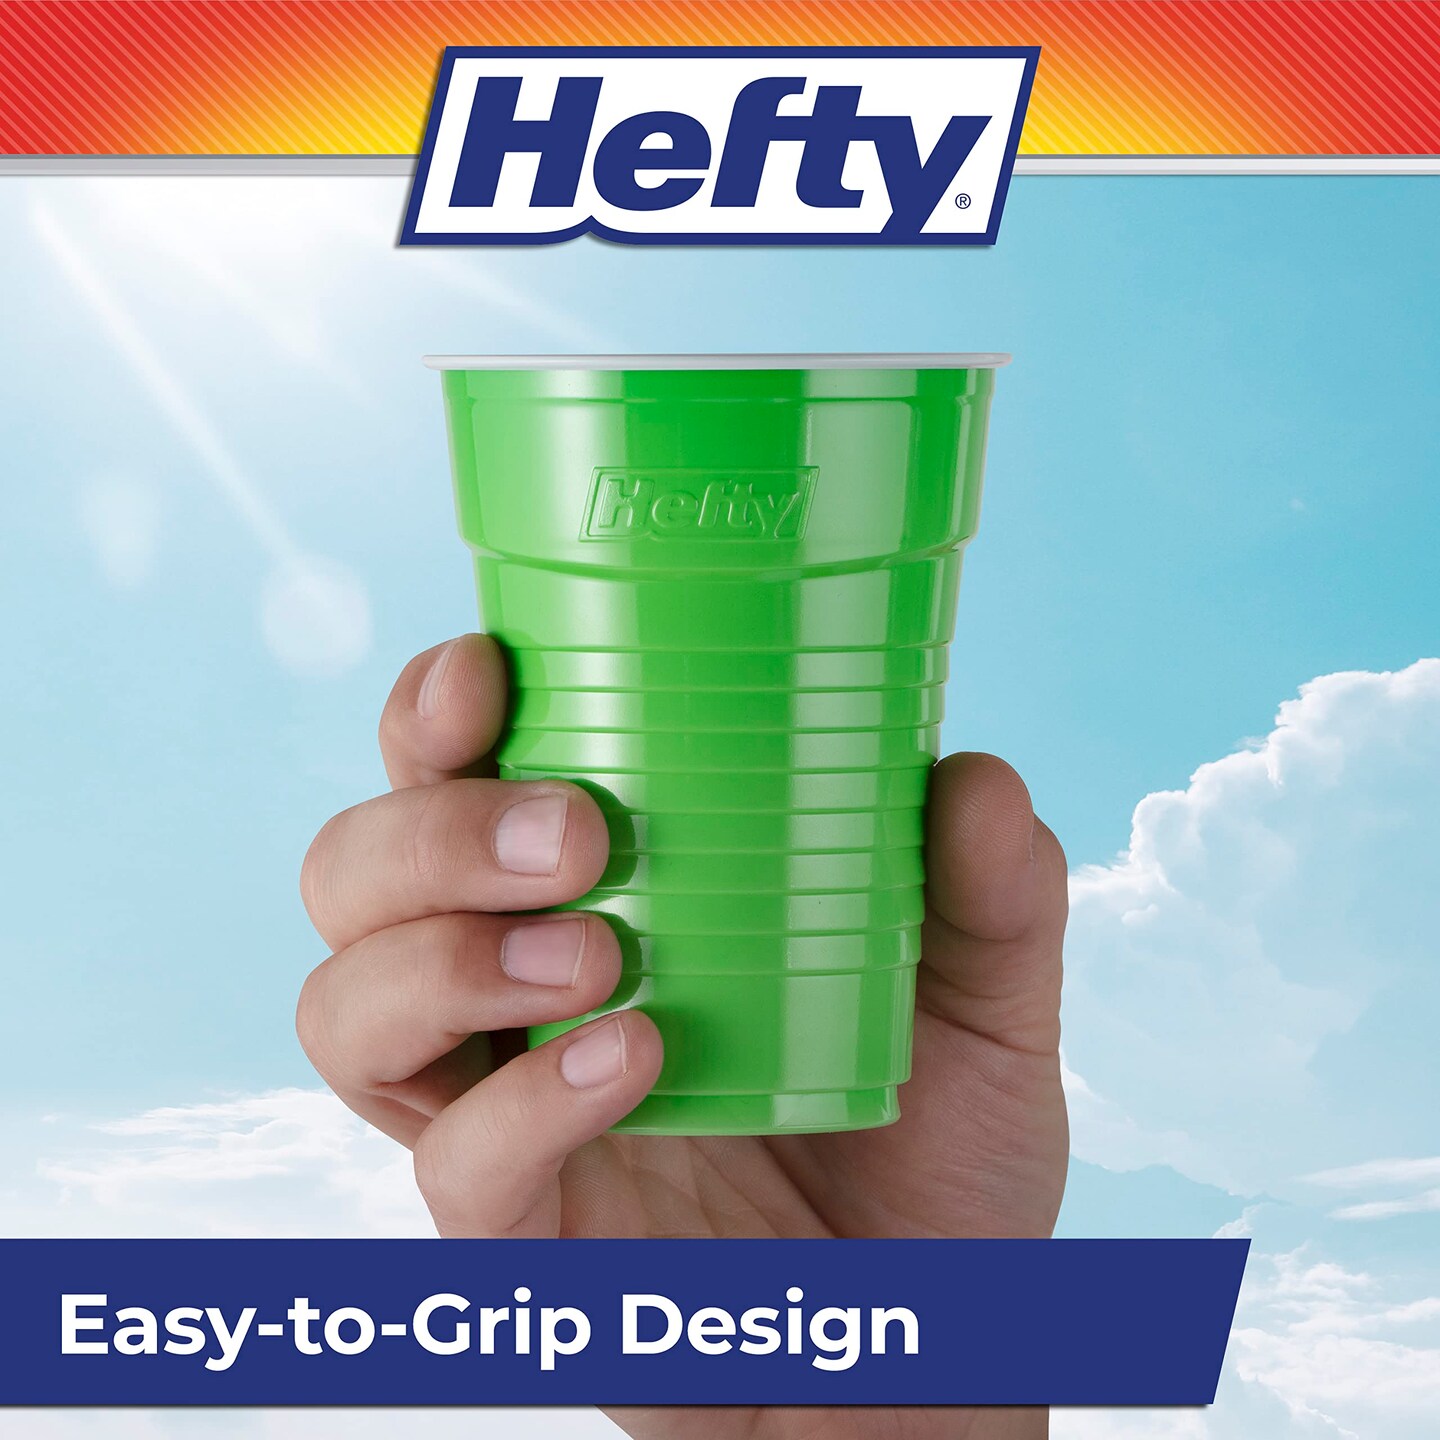 Hefty Disposable Party Cups, Assorted Colors,16 oz, 100 Count pack